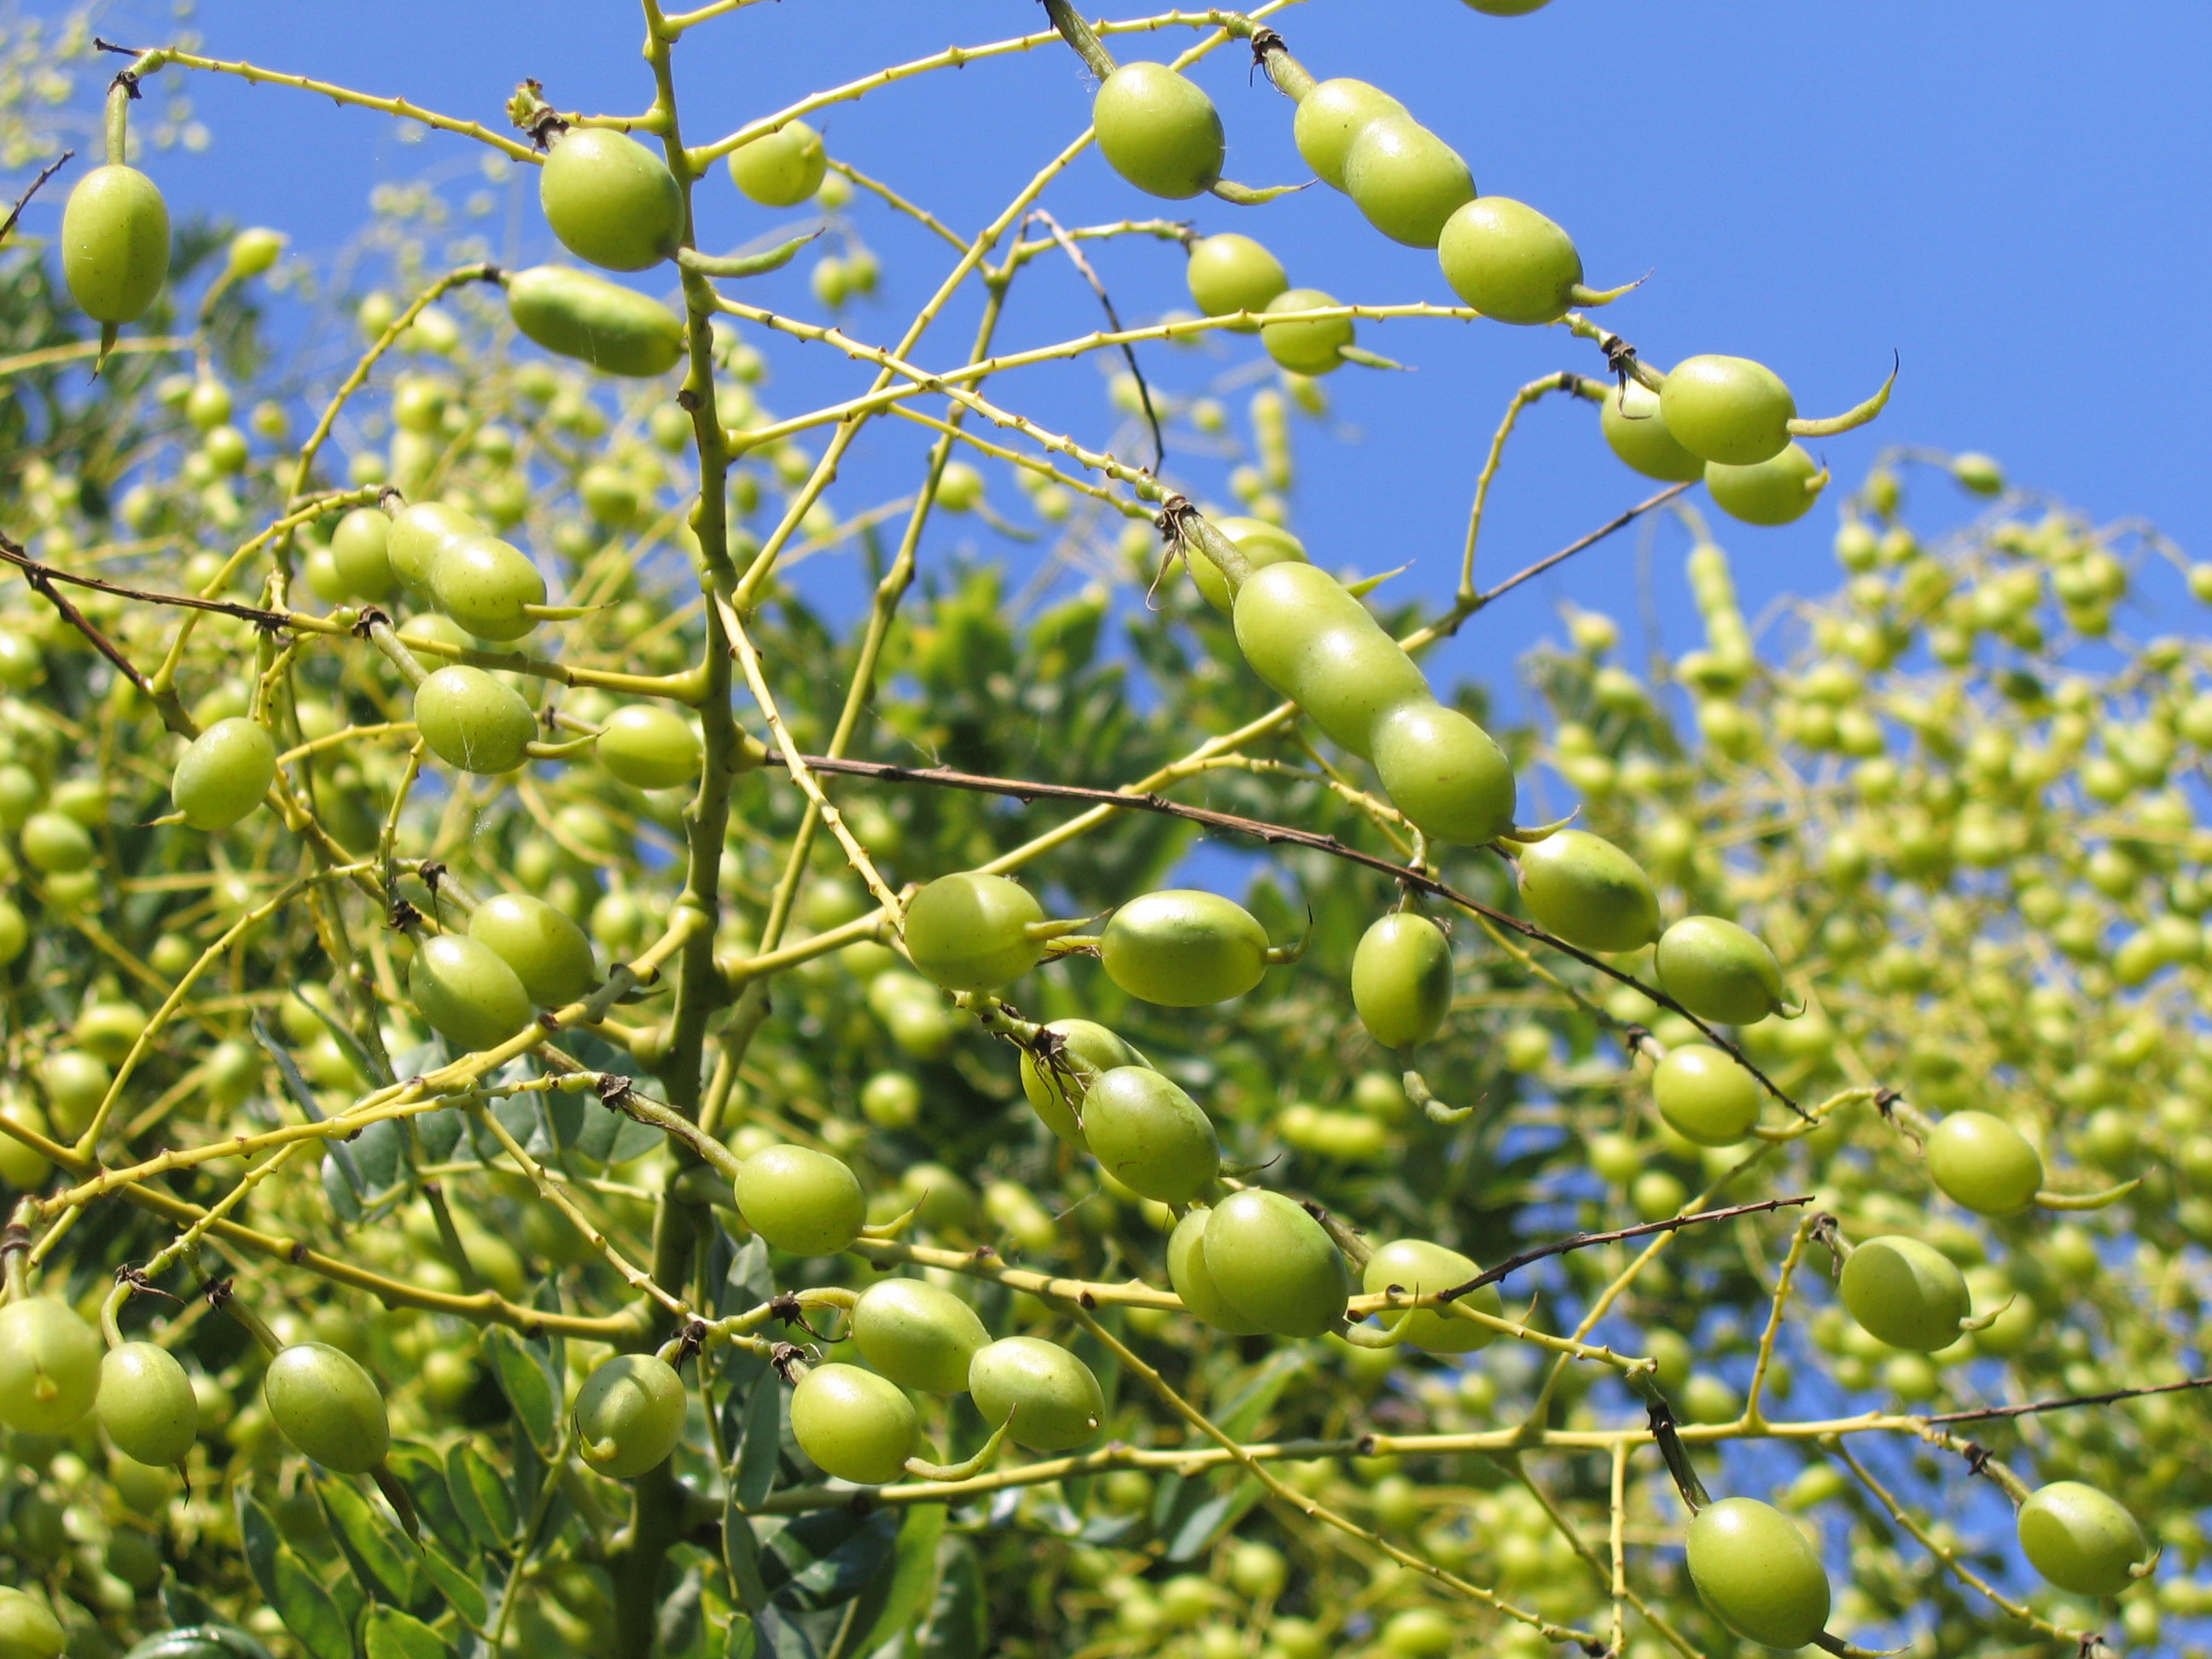 Olive fruits in the sun